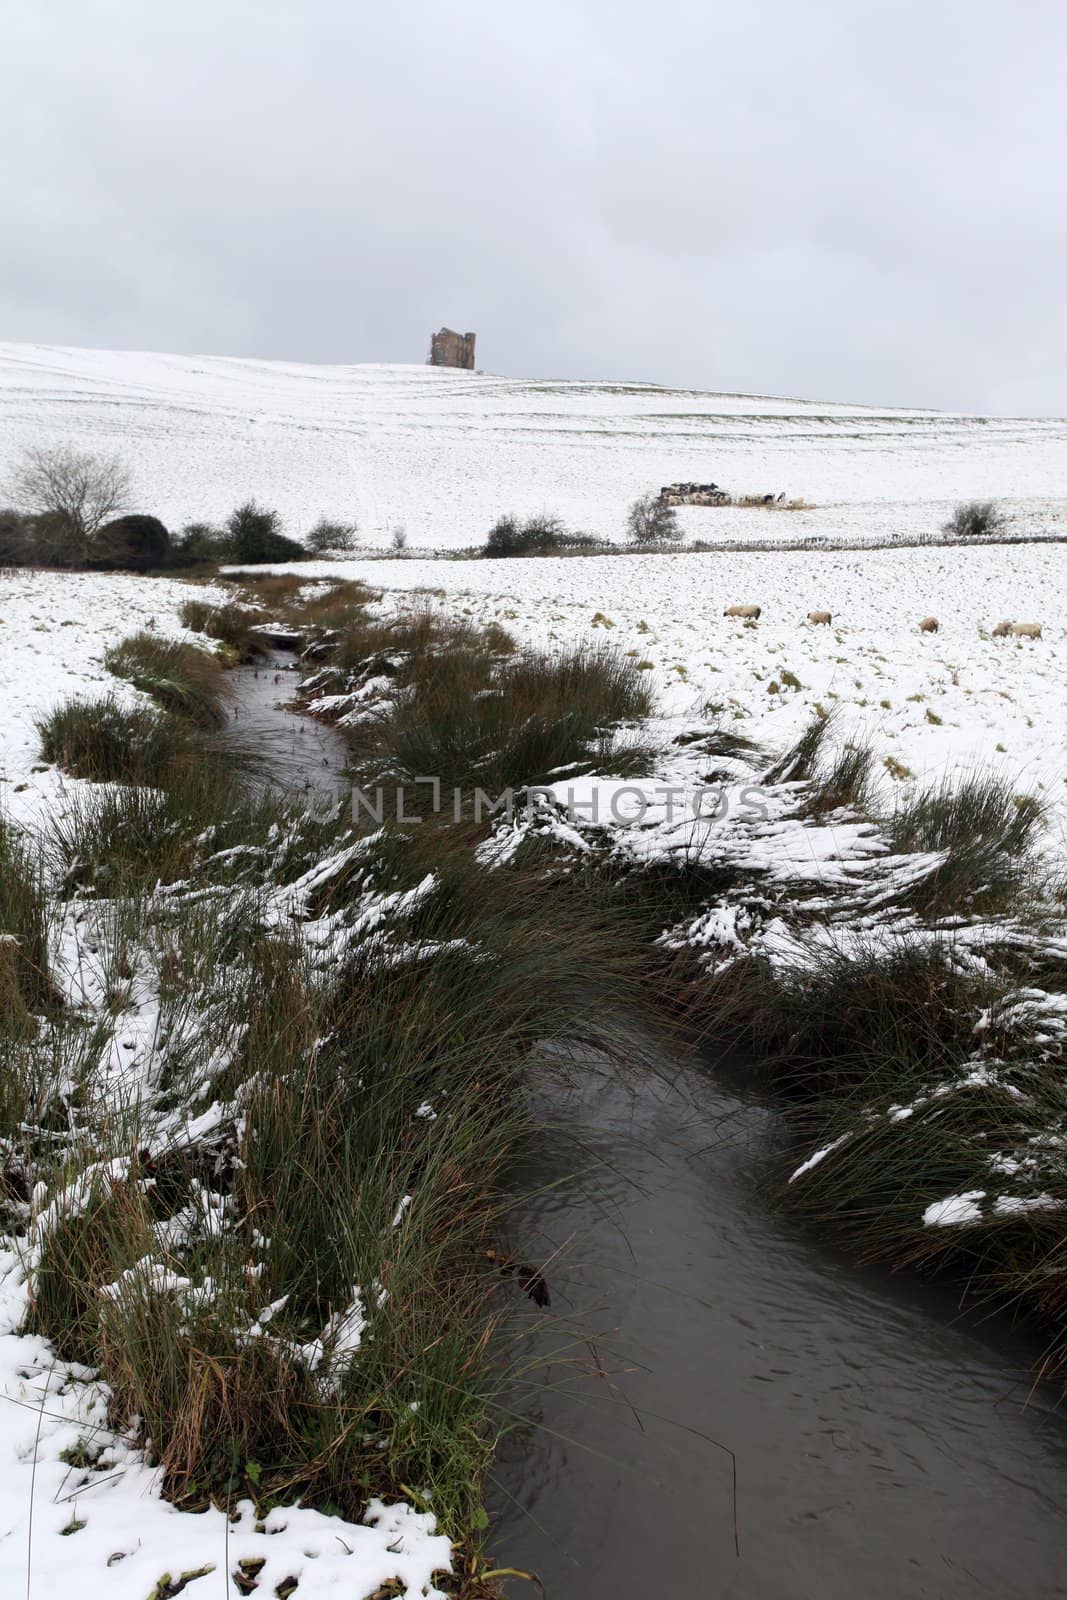 Abbotsbury village covered in snow in rural dorset england